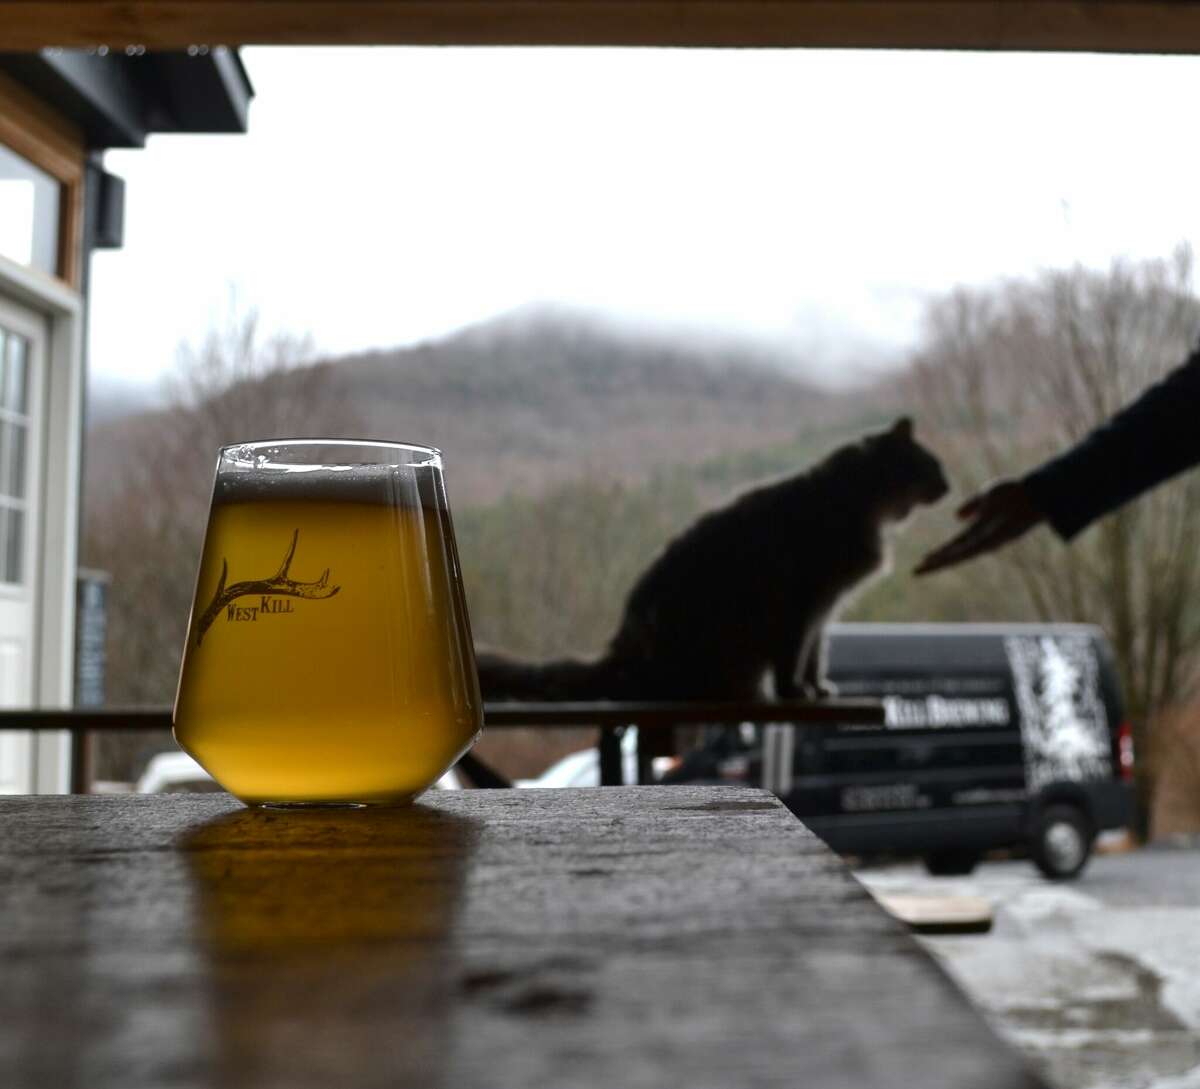 Fog engulfs the mountains on a rainy day at West Kill Brewing, while Brewery Cat Teddy gets some love from patrons.